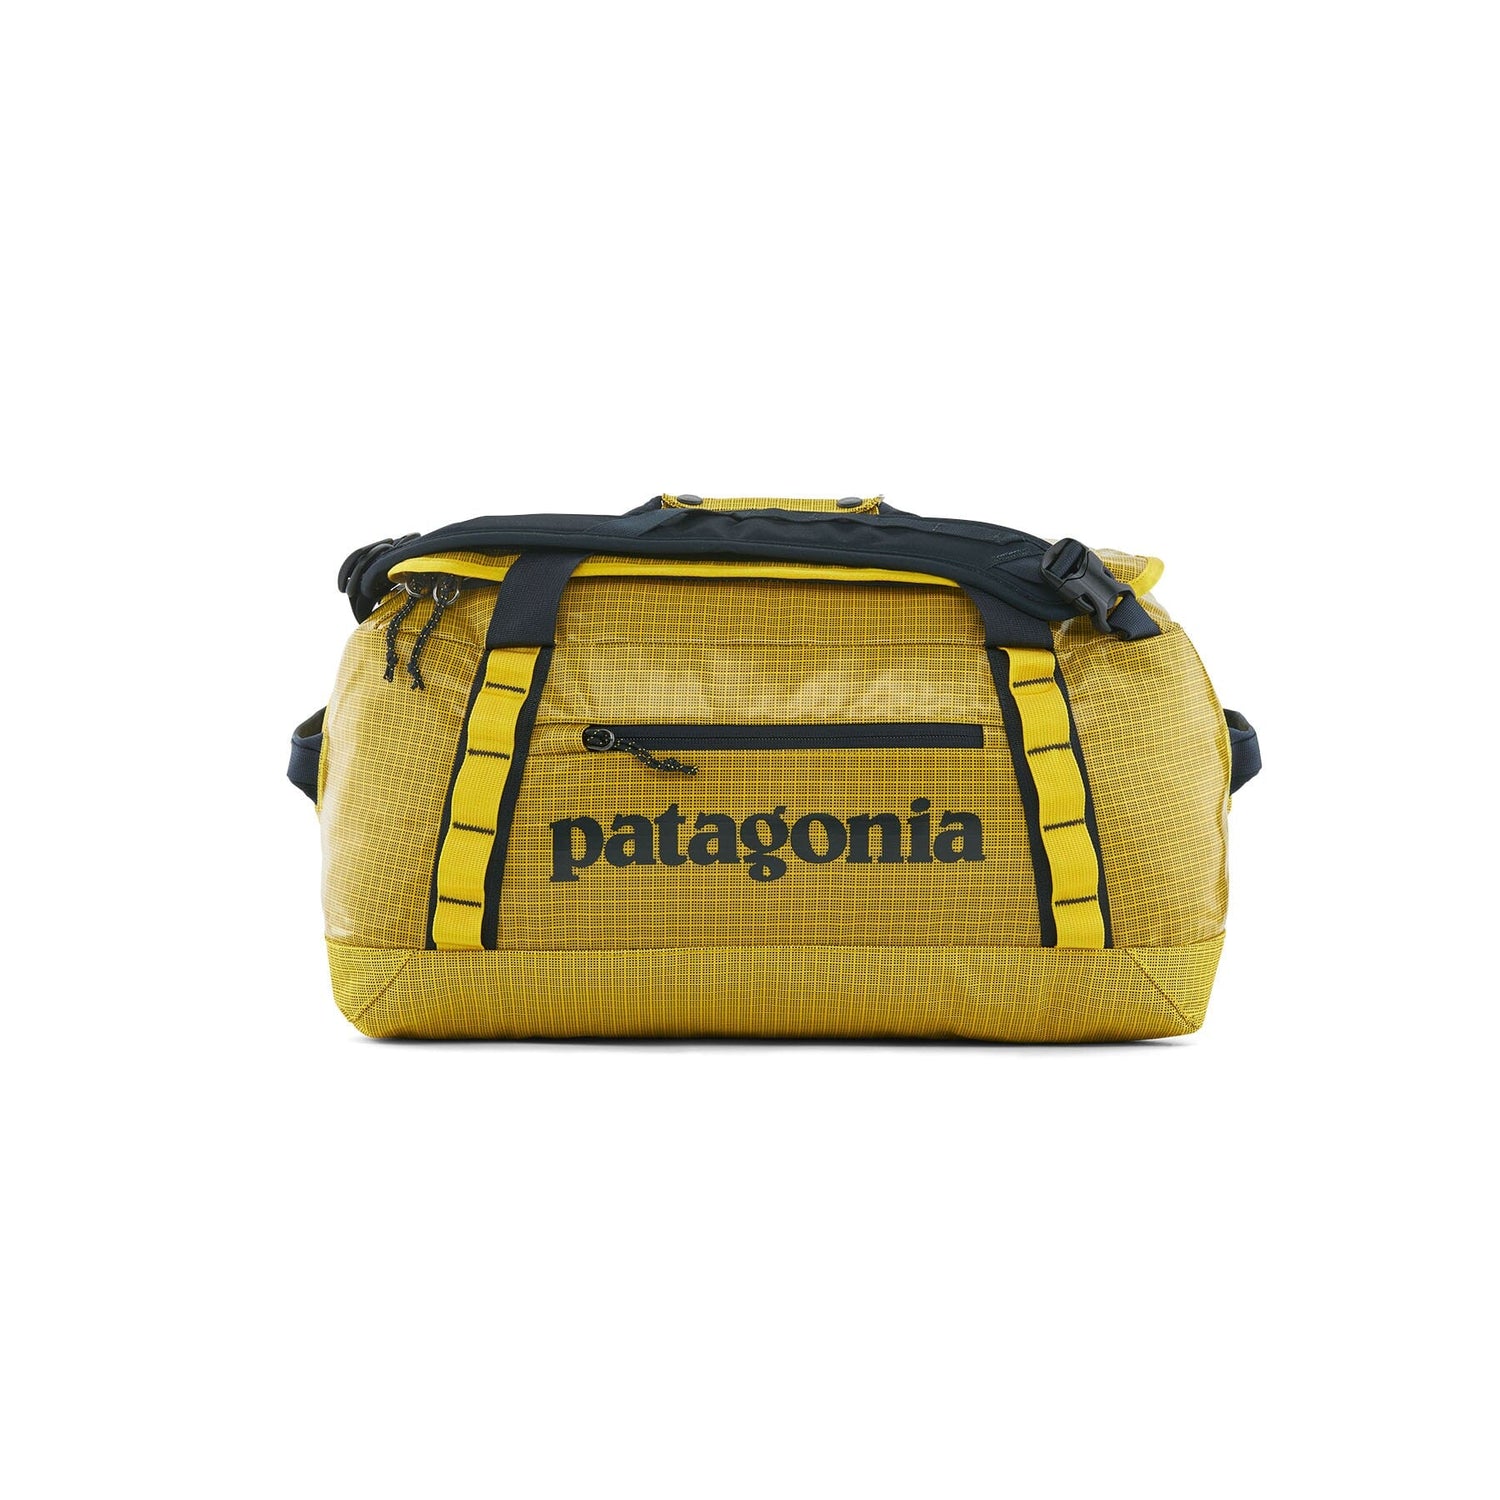 Patagonia Black Hole® Duffel Bag 40L - 100% Recycled Polyester Shine Yellow Bags